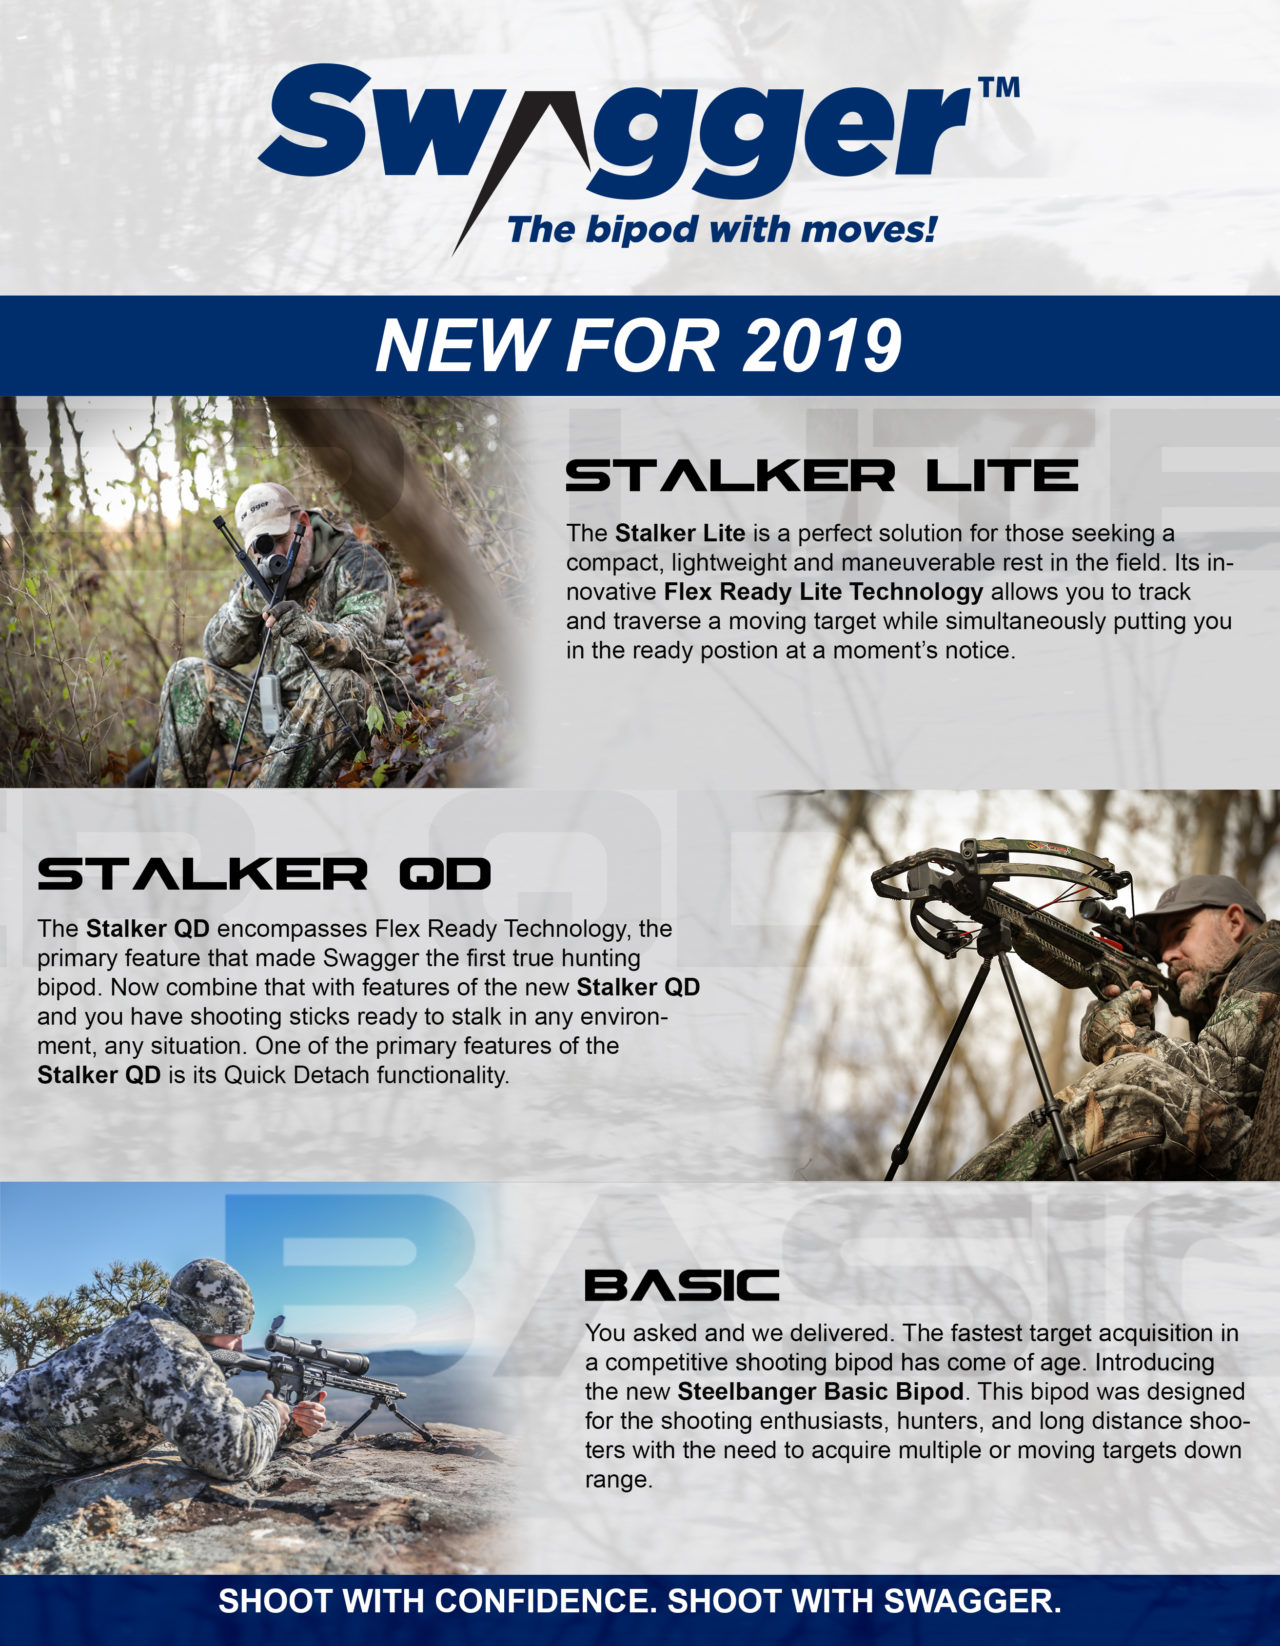 SWAGGER BIPODS NEW FOR 2019